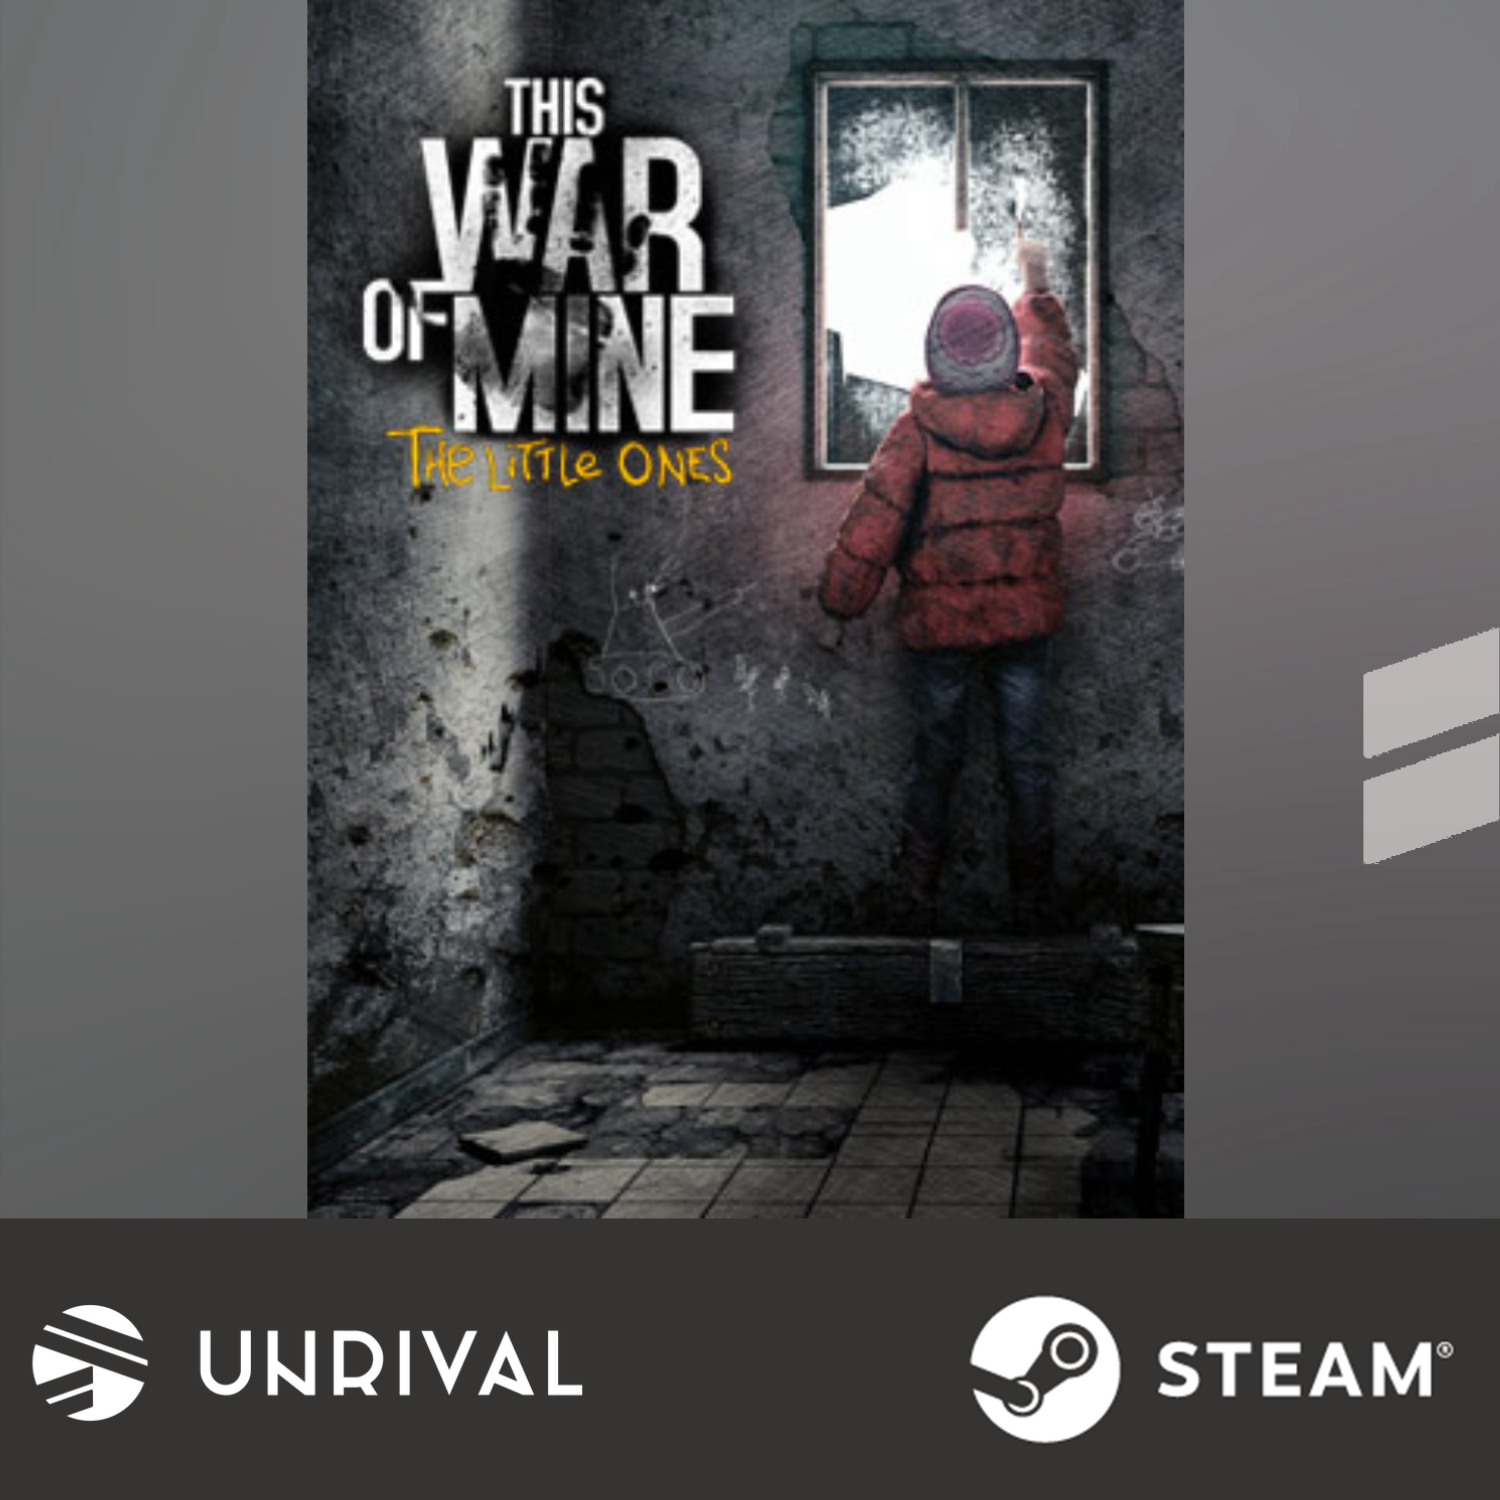 [Hot Sale] This War of Mine - The Little Ones DLC PC Digital Download Game - Unrival